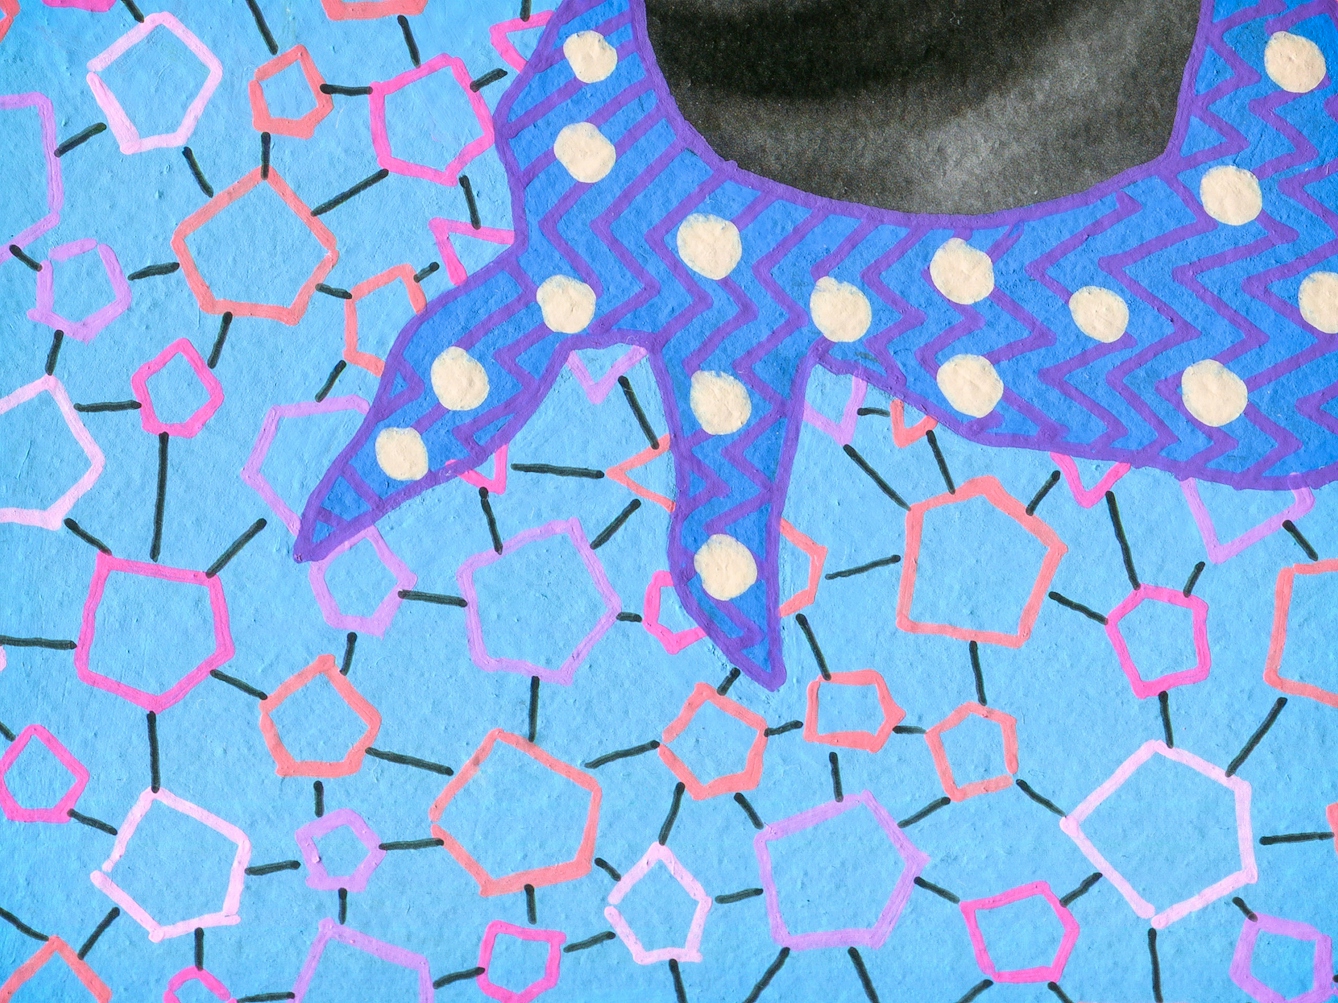 Artwork created by painting over the surface of a black and white photographic print with colourful paint. The artwork shows the original neck of a man from the photograph beneath in the top right. The individual's cloths are painted with a blue background and covered in orange, pink and purple linked hexagons. Around his neck is a neckerchief painted a darker blue with purple zig-zag lines and yellow spots. The texture of the paint can be seen, including the boundary between the painted area and the original photographic print.